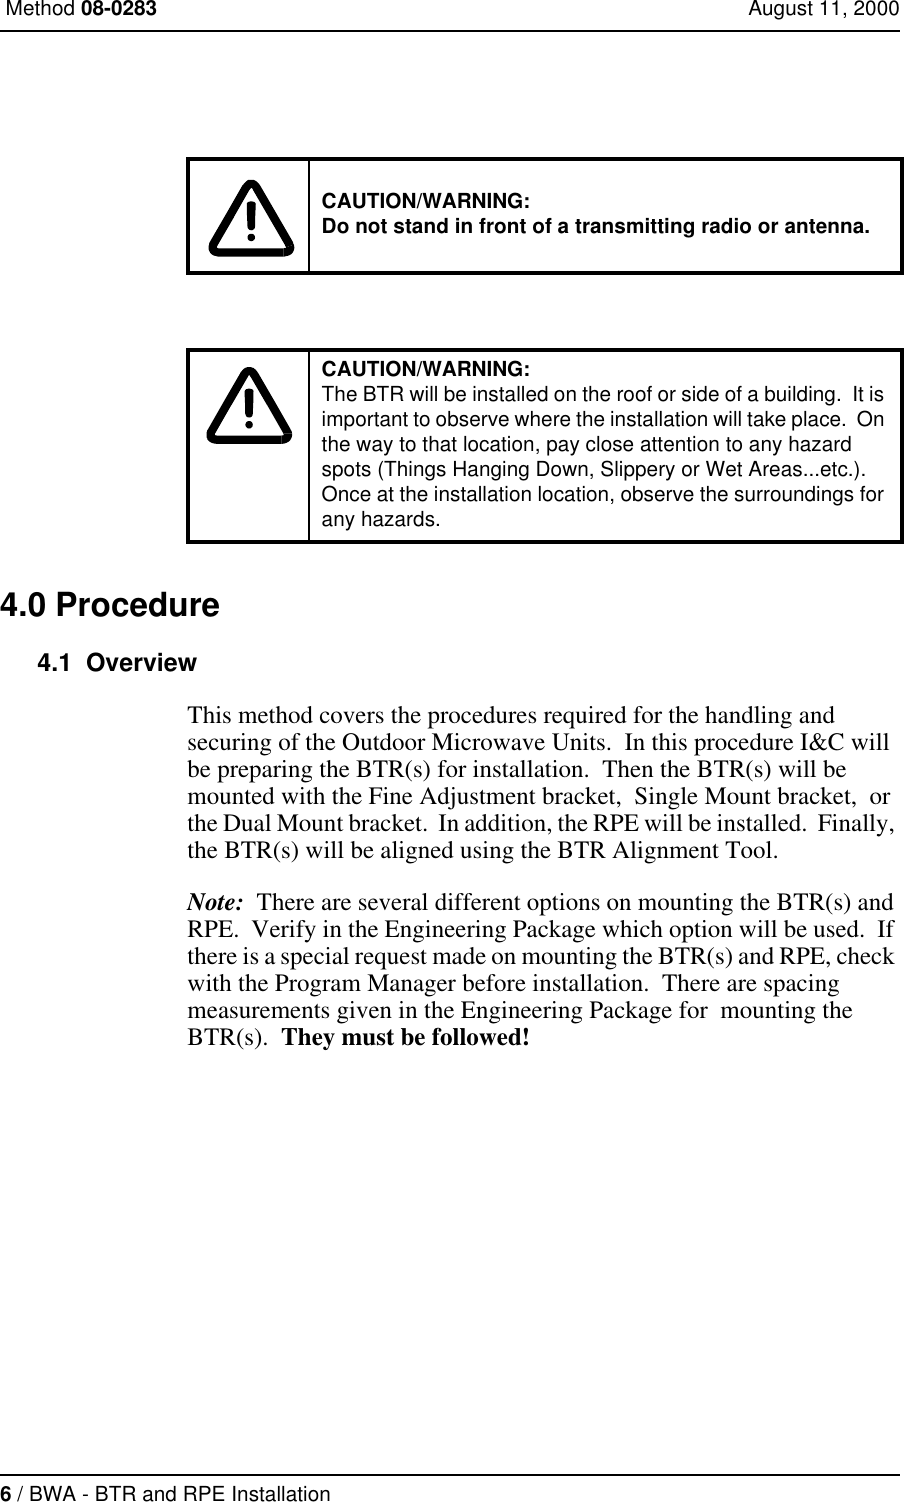 6 / BWA - BTR and RPE Installation Method 08-0283 August 11, 20004.0 Procedure4.1  OverviewThis method covers the procedures required for the handling and securing of the Outdoor Microwave Units.  In this procedure I&amp;C will be preparing the BTR(s) for installation.  Then the BTR(s) will be mounted with the Fine Adjustment bracket,  Single Mount bracket,  or the Dual Mount bracket.  In addition, the RPE will be installed.  Finally, the BTR(s) will be aligned using the BTR Alignment Tool.Note:  There are several different options on mounting the BTR(s) and RPE.  Verify in the Engineering Package which option will be used.  If there is a special request made on mounting the BTR(s) and RPE, check with the Program Manager before installation.  There are spacing measurements given in the Engineering Package for  mounting the BTR(s).  They must be followed!CAUTION/WARNING:Do not stand in front of a transmitting radio or antenna.CAUTION/WARNING:The BTR will be installed on the roof or side of a building.  It is important to observe where the installation will take place.  On the way to that location, pay close attention to any hazard spots (Things Hanging Down, Slippery or Wet Areas...etc.). Once at the installation location, observe the surroundings for any hazards.